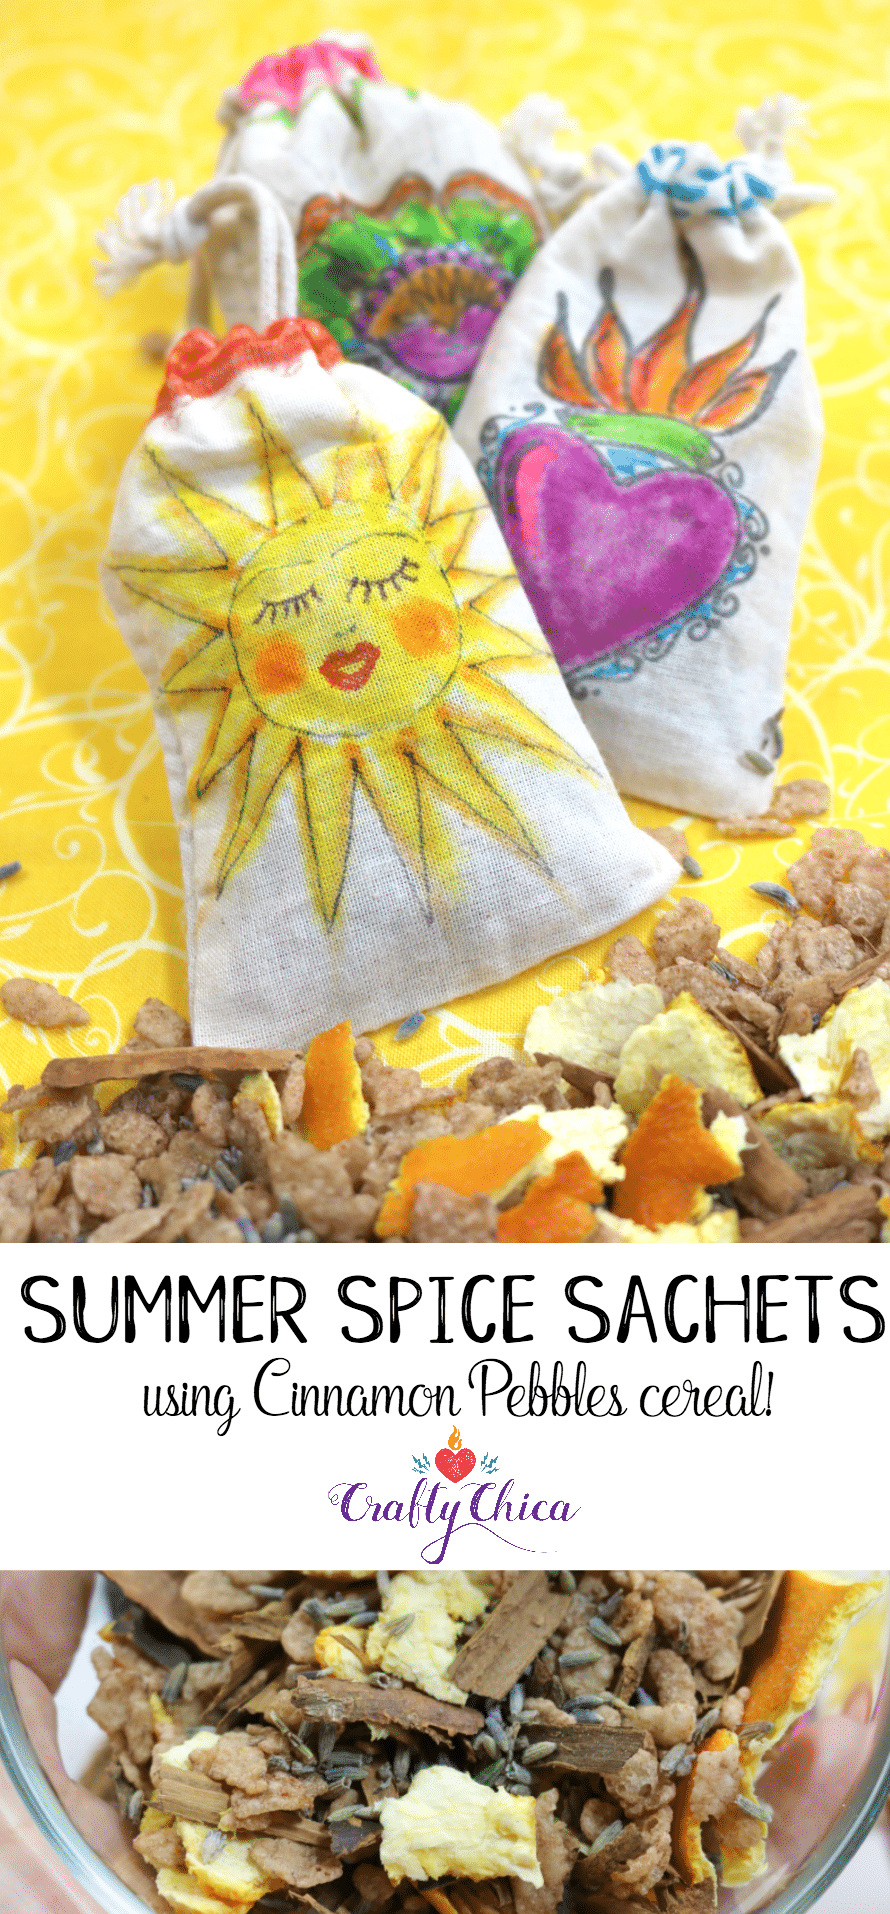 Summer Spice Sachets by Crafty Chica.